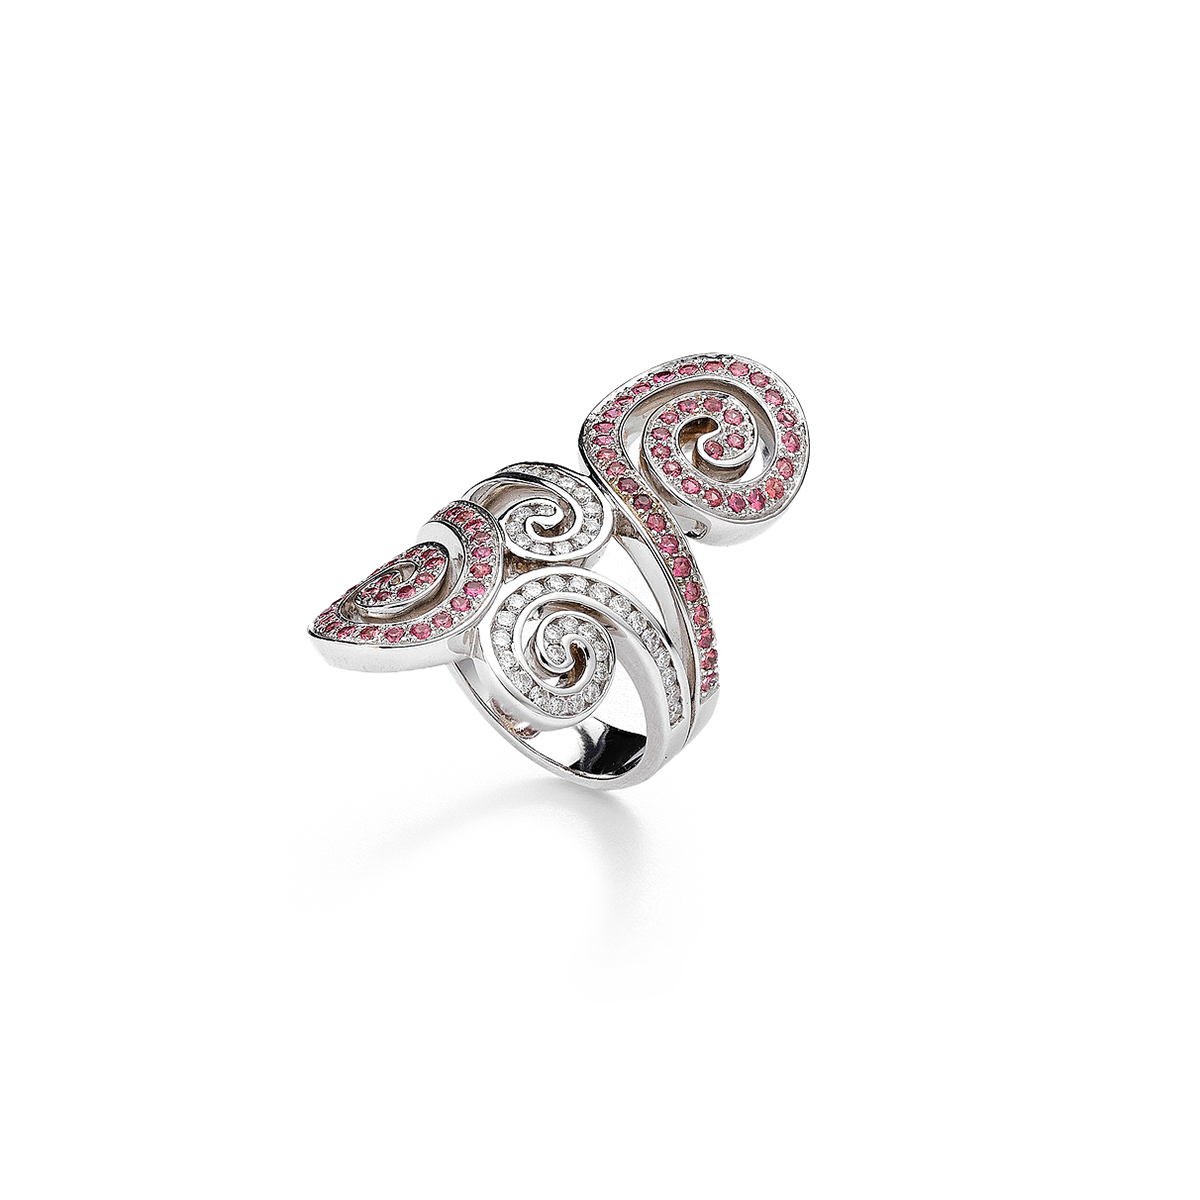 jewels-diamonds-pink-sapphires-18kt-white-gold-ring